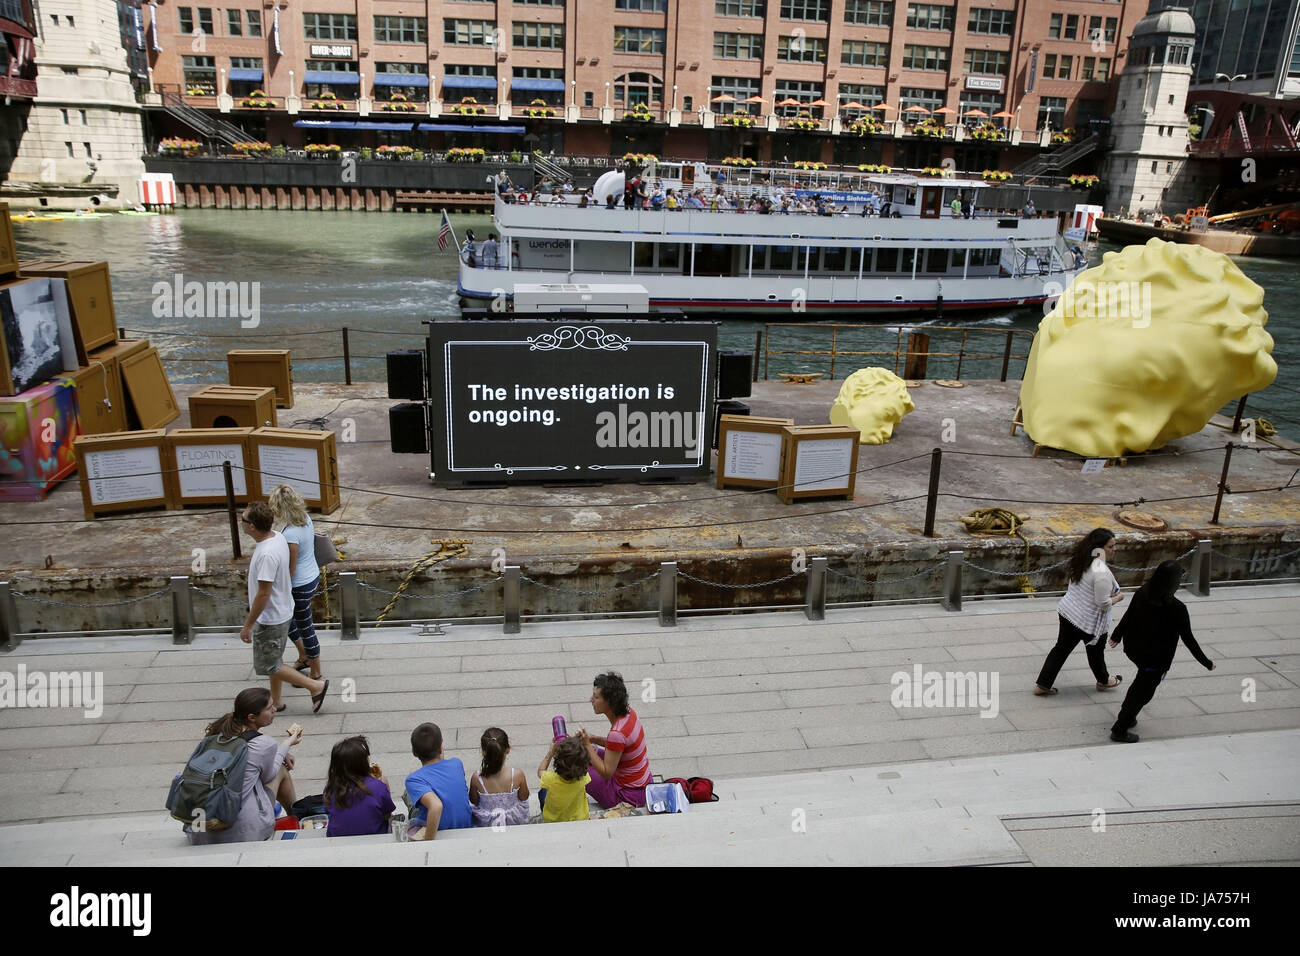 (170824) -- CHICAGO, Aug. 24, 2017 (Xinhua) -- Photo taken on Aug. 23, 2017 shows Floating Museum docked at the riverside in Chicago, the United States. Celebrating the River's industrial past, Floating Museum transforms a barge into an aesthetically striking mobile gallery filled with art crates displaying work created by local artists and our collaborators. Floating Museum exists in the continuum of artists examining their relationship to institutions, and responds to the evolution of museums; ranging from the cabinet of curiosities or Wunderkabinett between the sixteenth and eighteenth cent Stock Photo